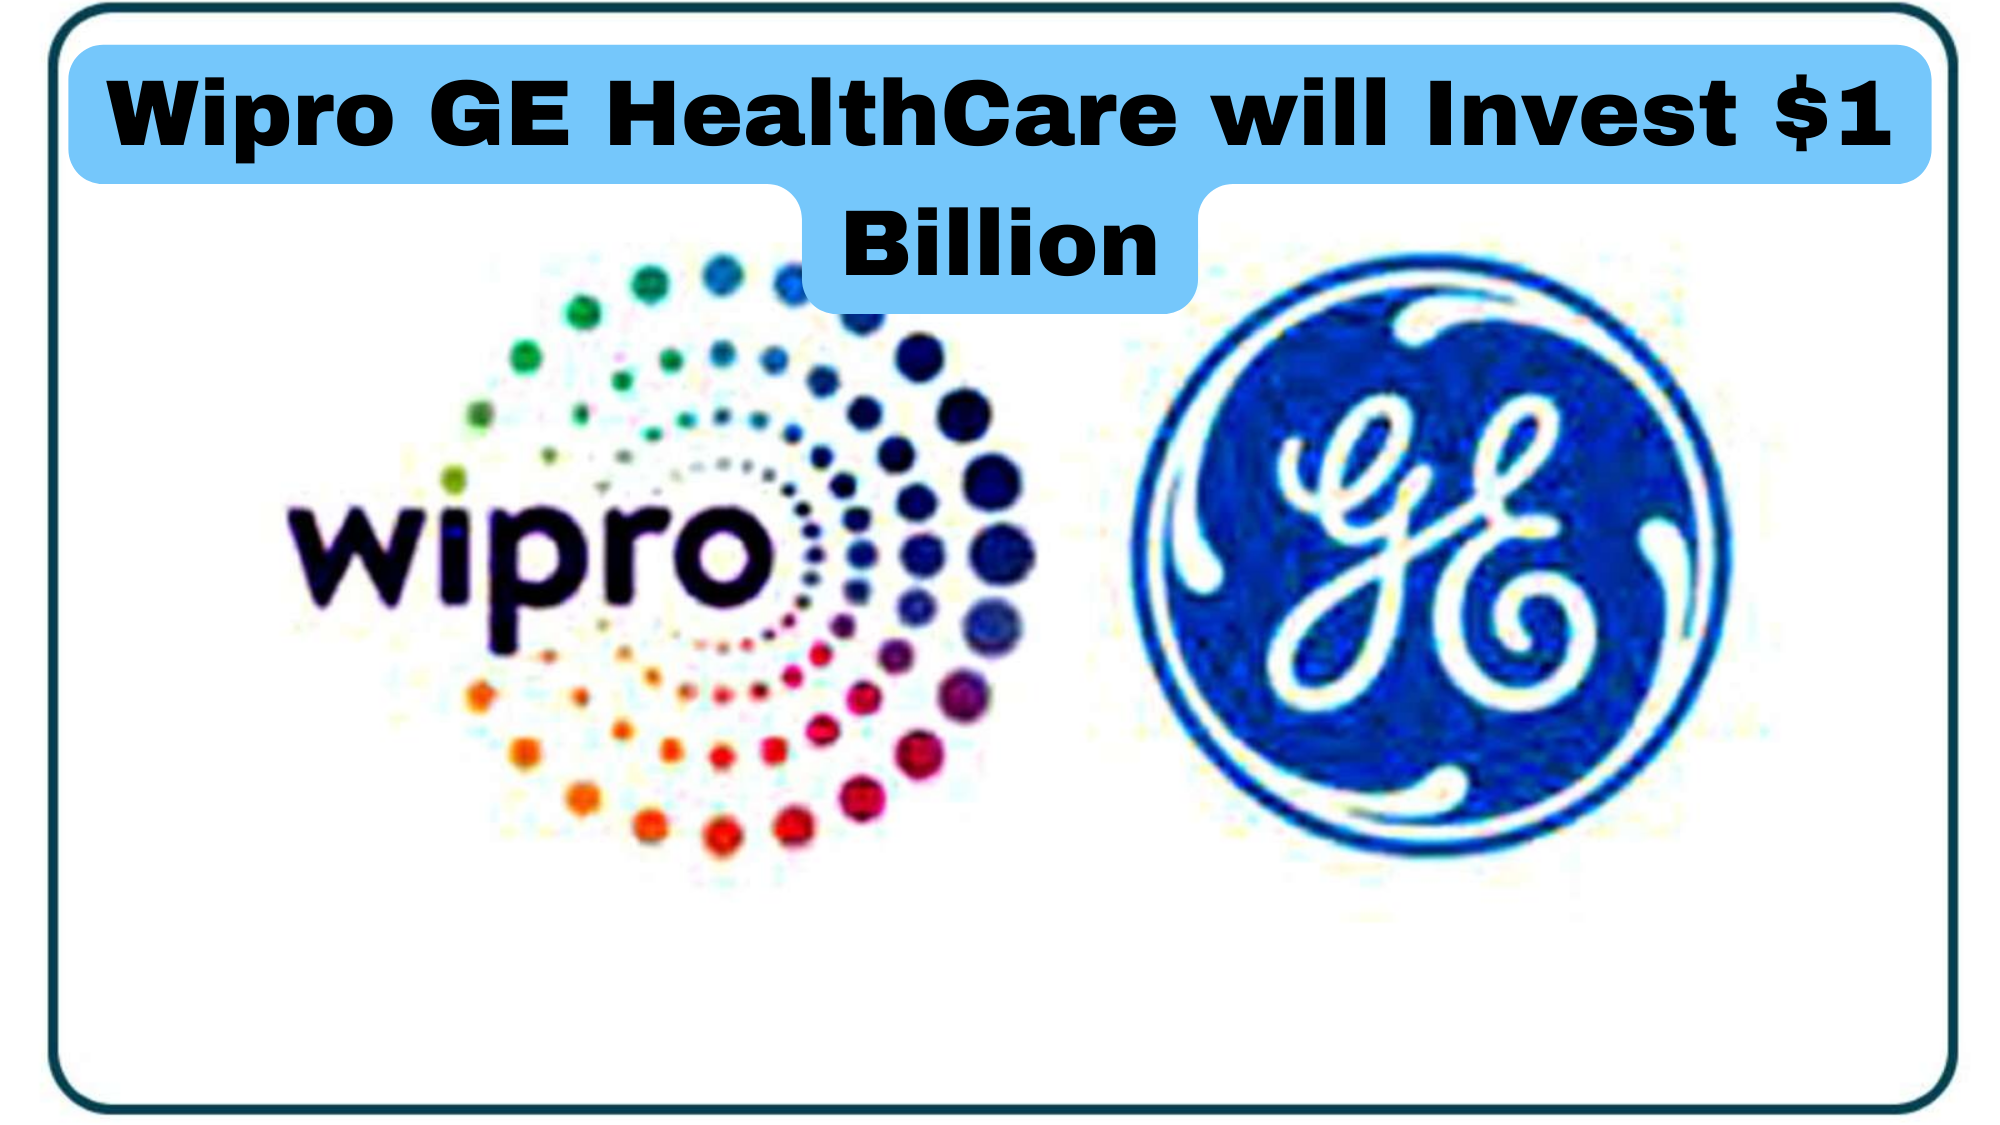 What Makes Billion Dollar Bet? Wipro GE Healthcare's Investment